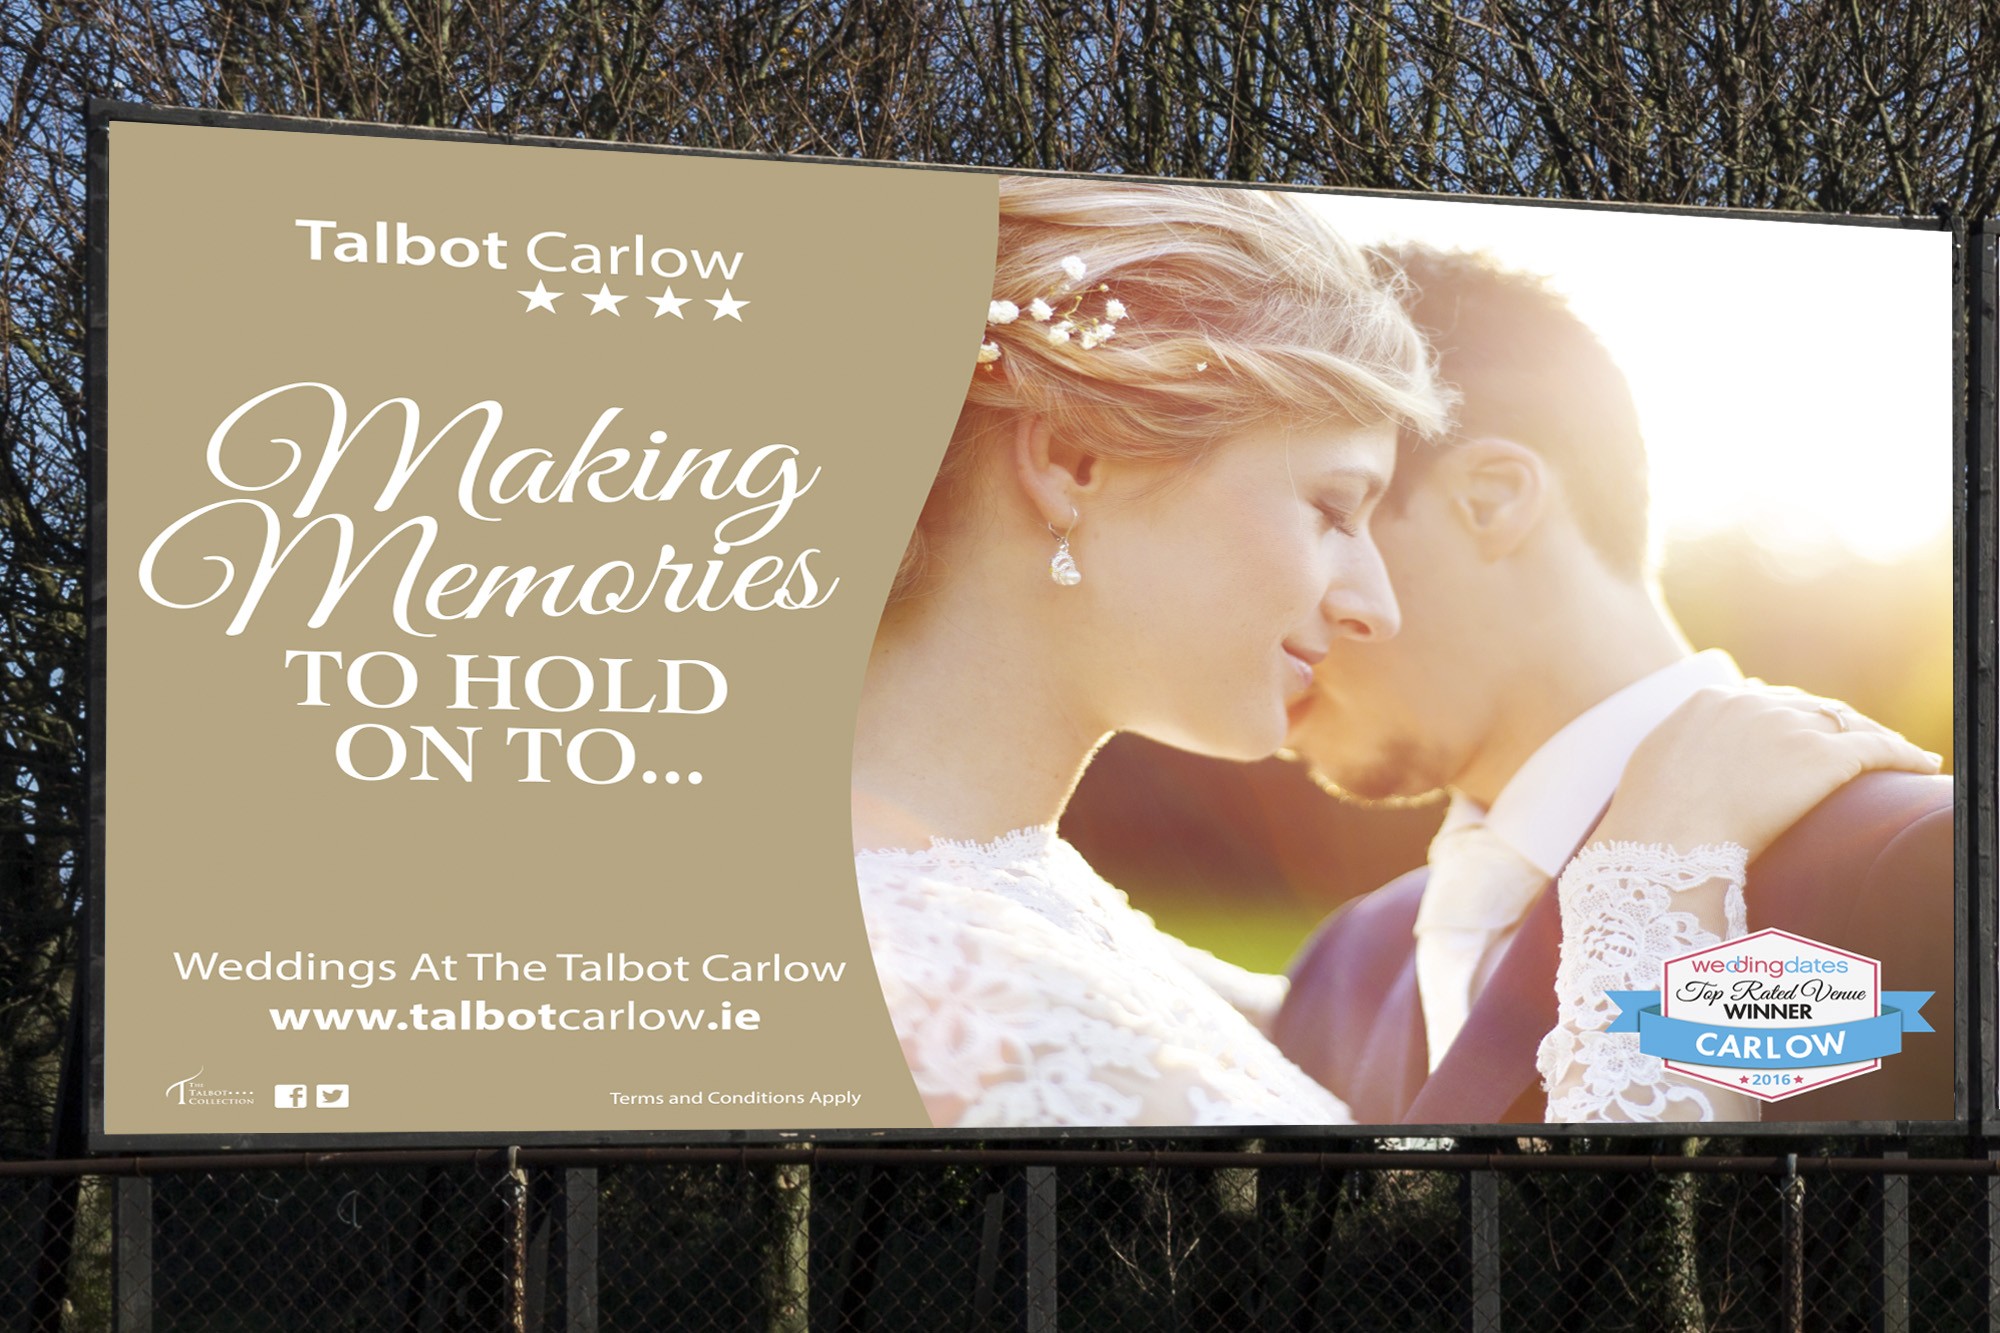 Billboard Advertising - Touchpoint Media, Carlow